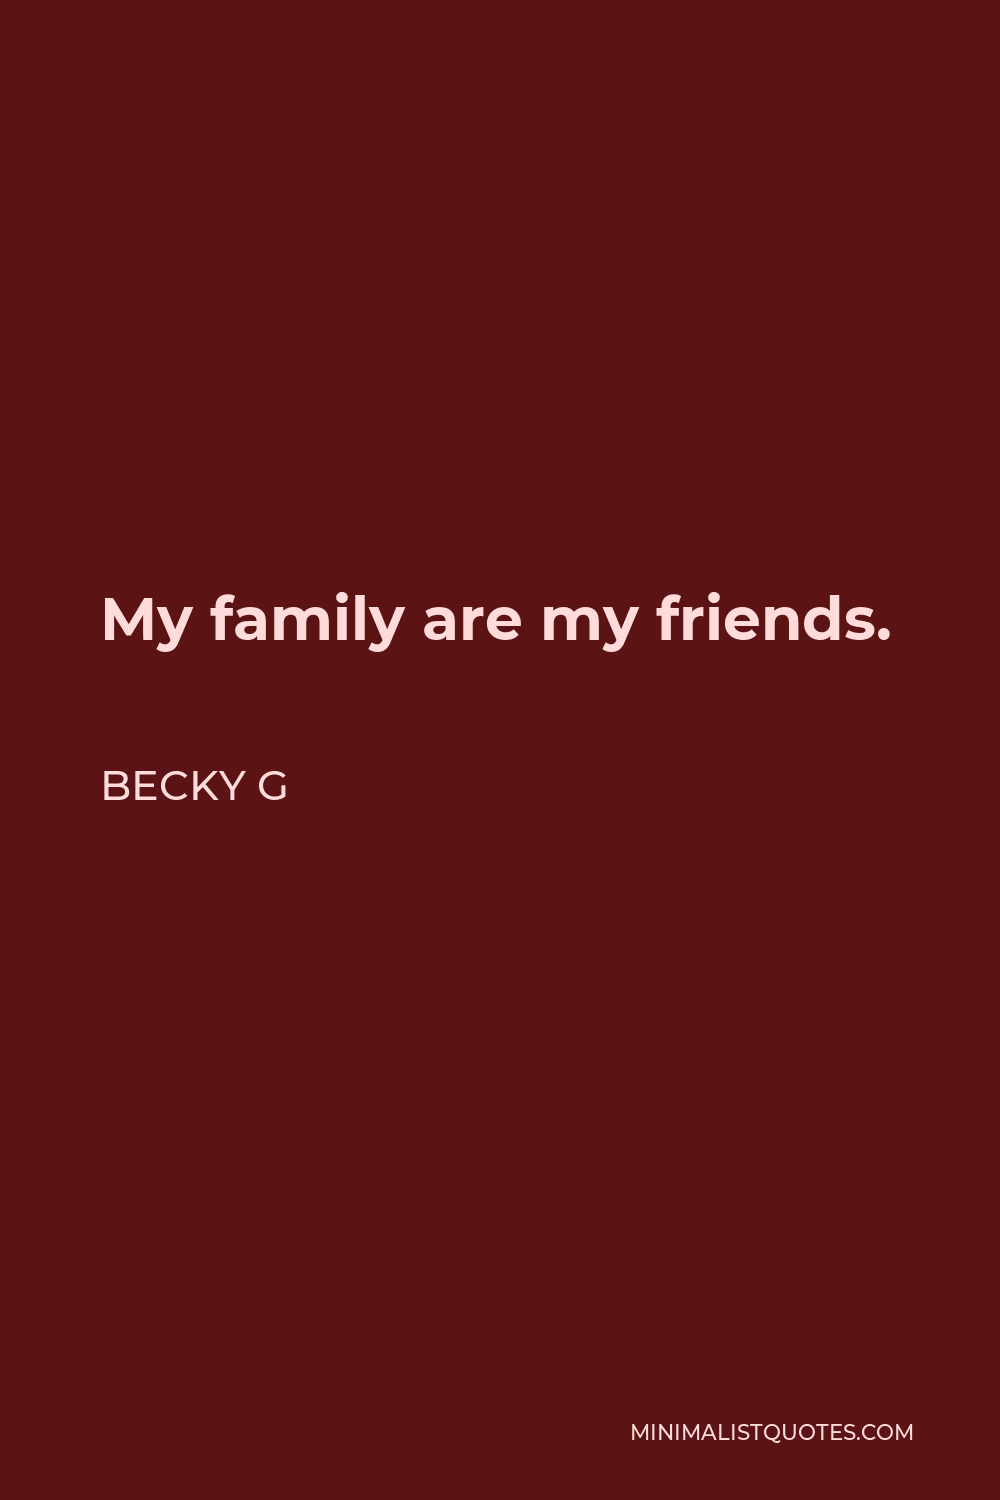 Becky G Quote - My family are my friends.